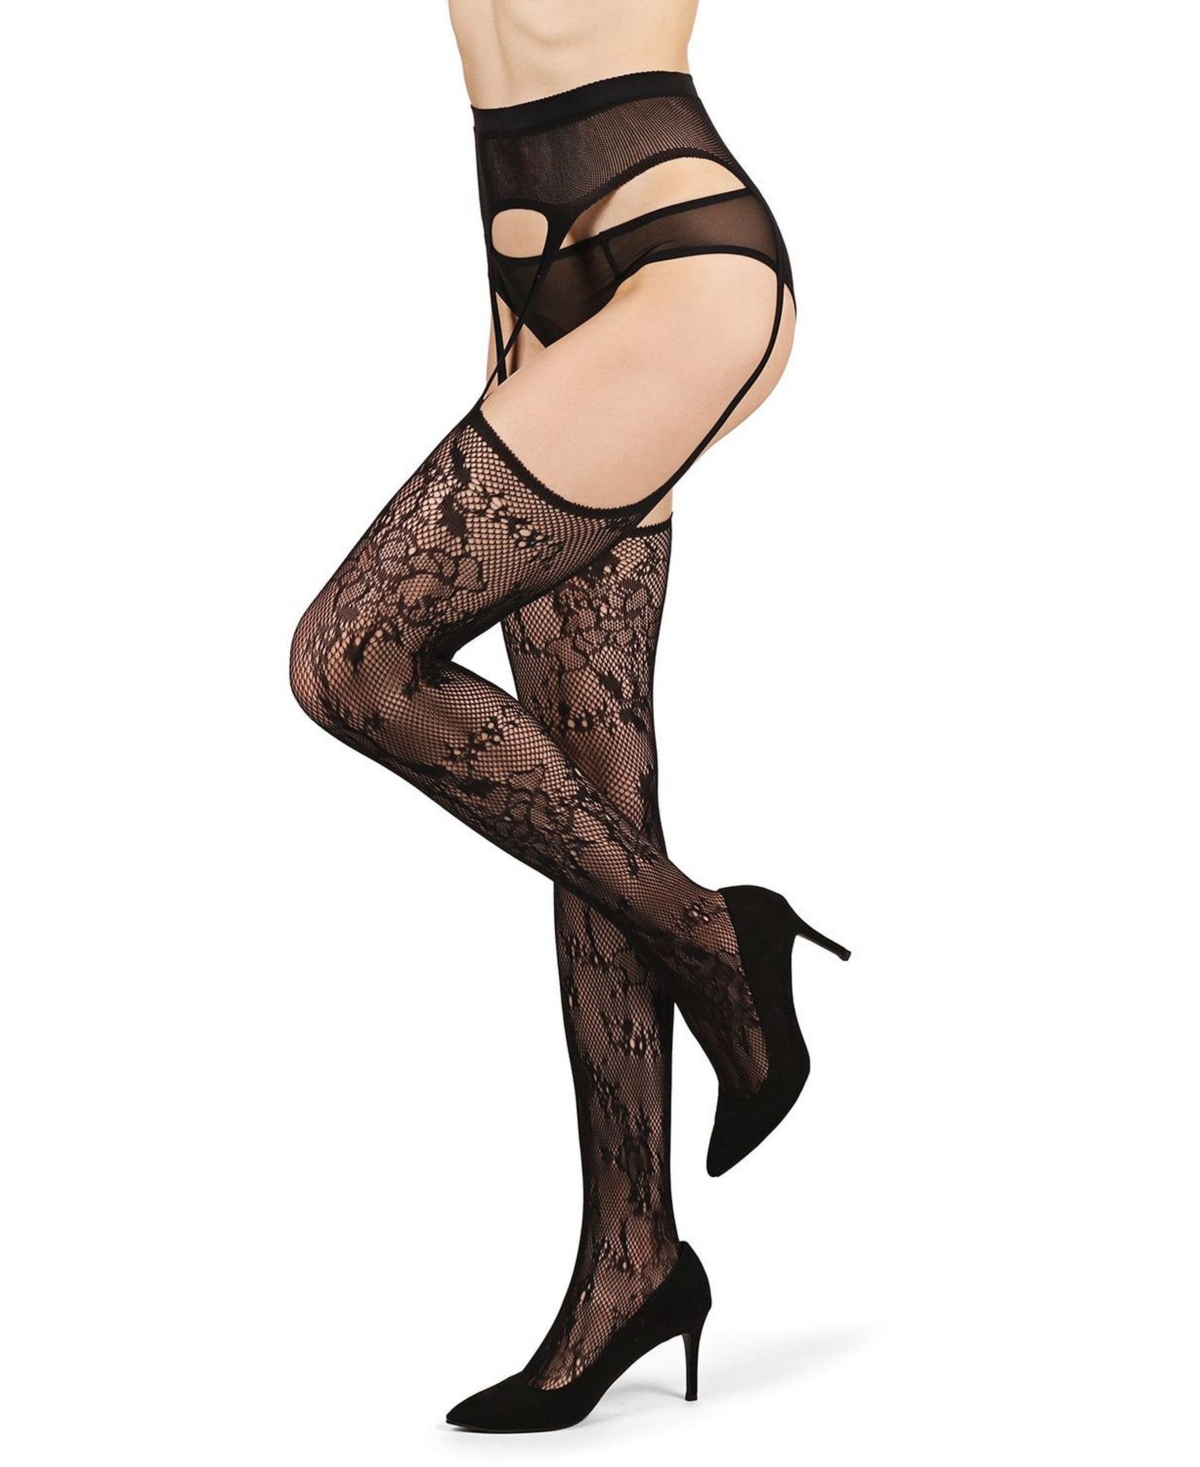 Women's All-In-One Lace Suspender Floral Fishnet Tights - Black